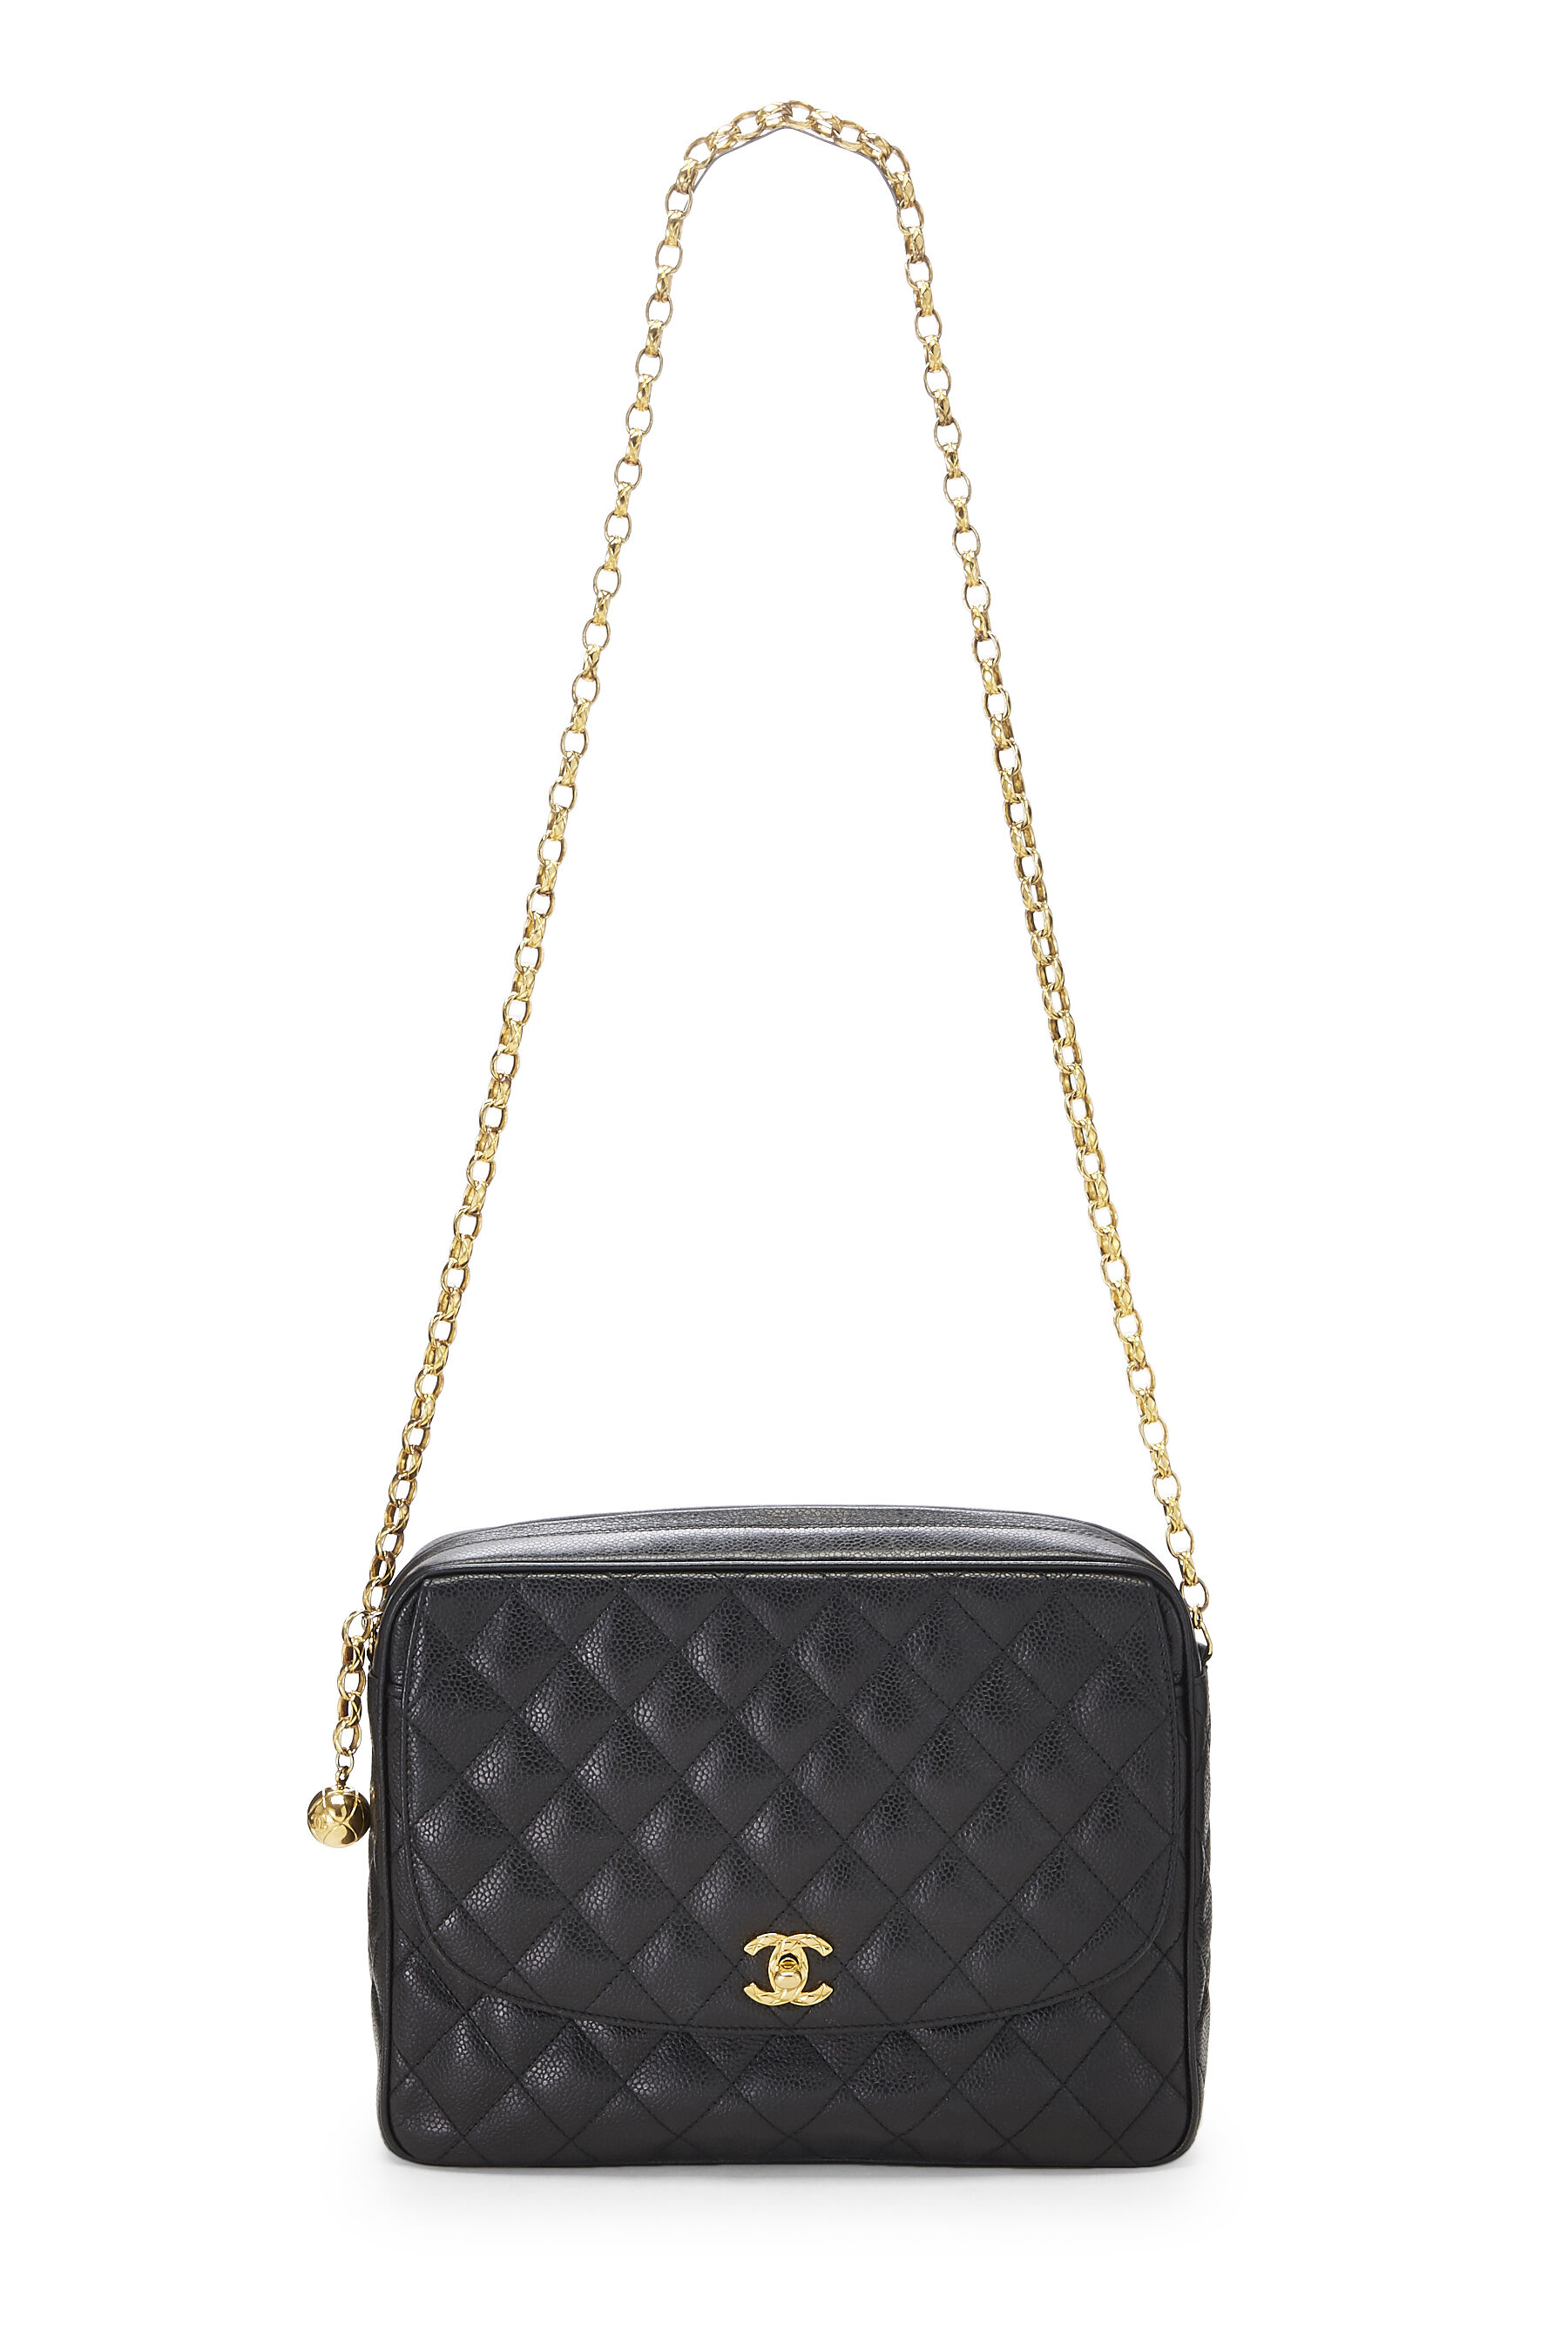 Chanel Black Calfskin Bubble Quilted Camera Bag Q6B4PT3PKB000